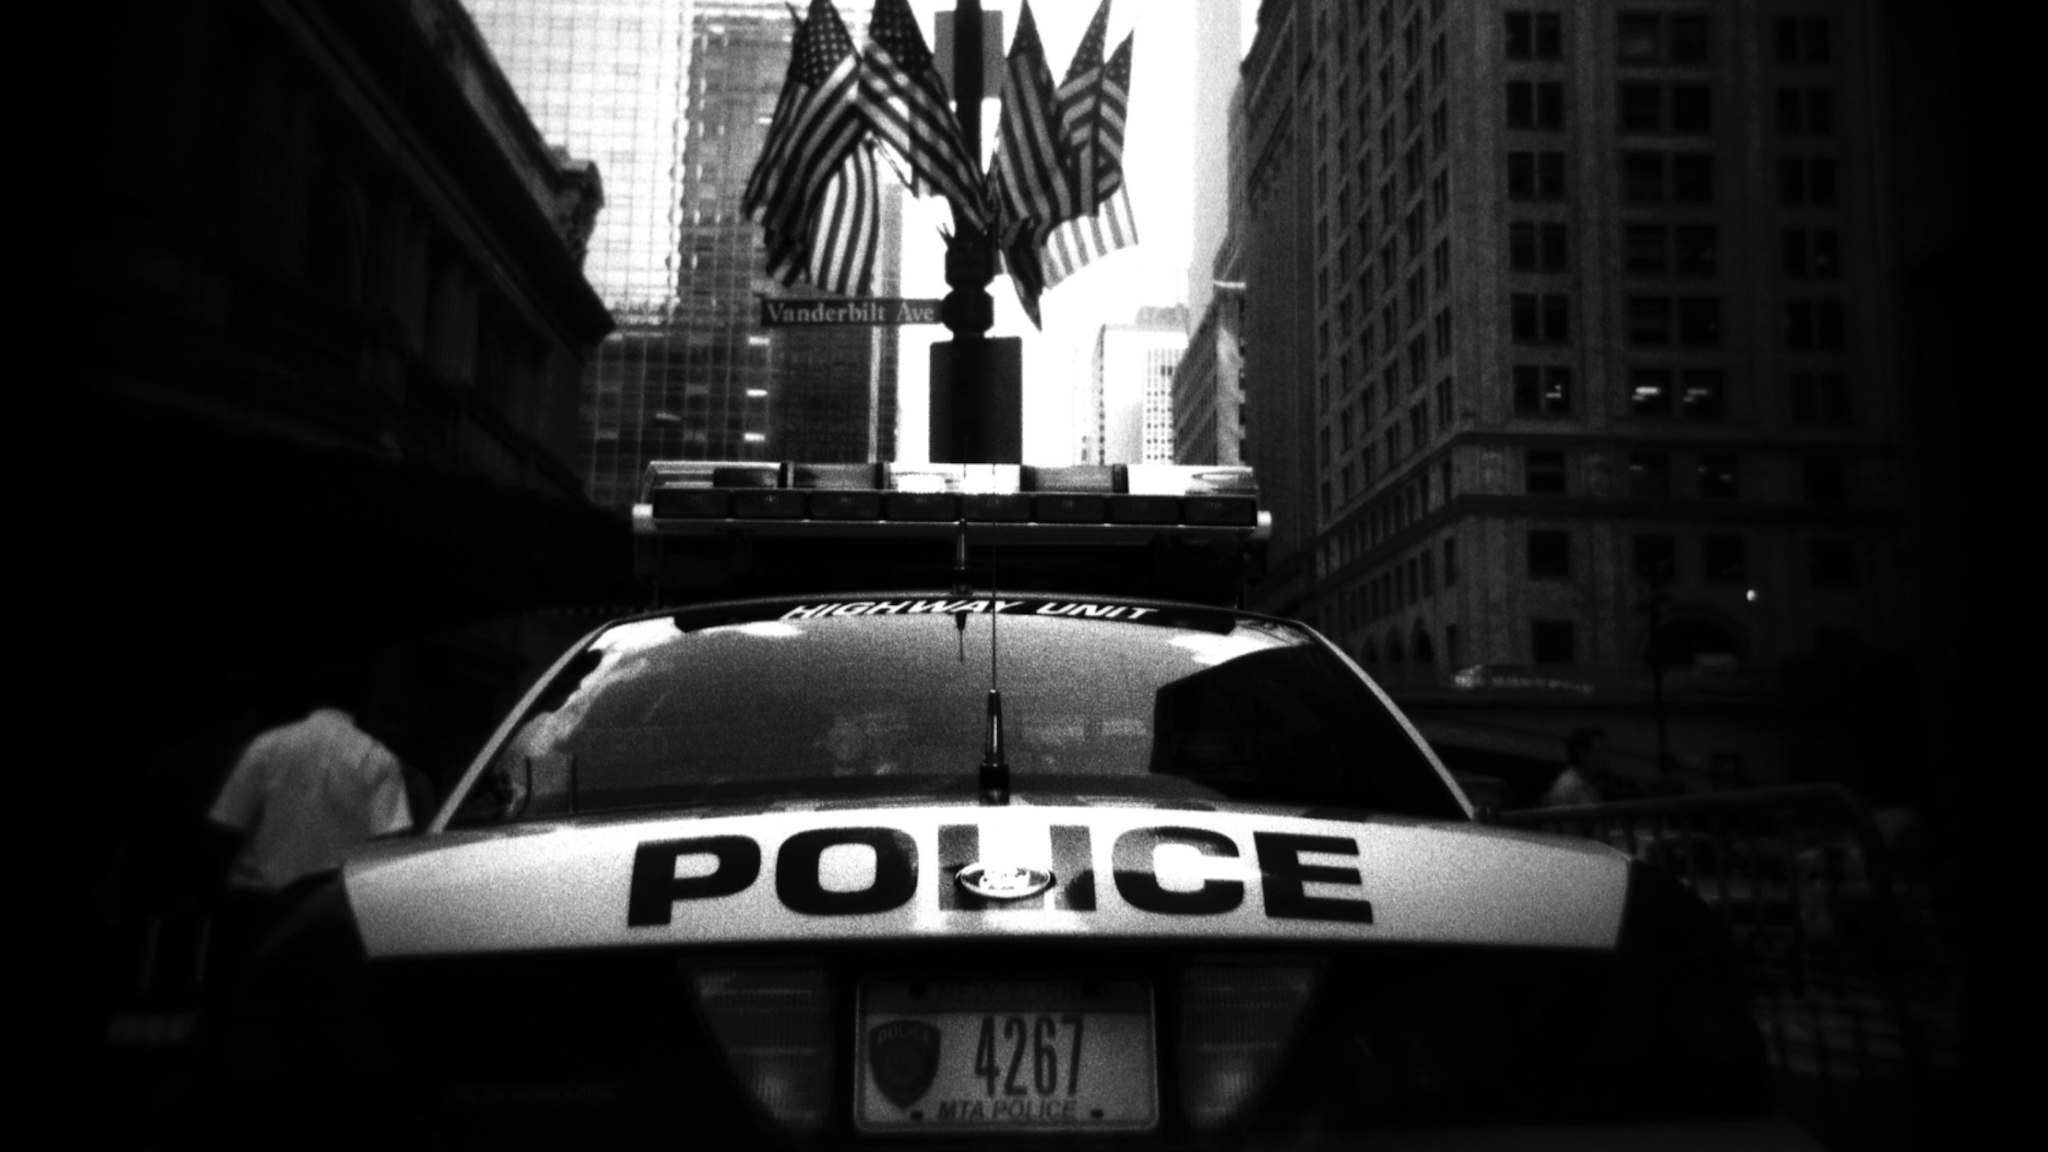 A New York City police car blocks traffic from entering Vanderbilt street in front of Grand Central station August 4, 2004 in New York City.